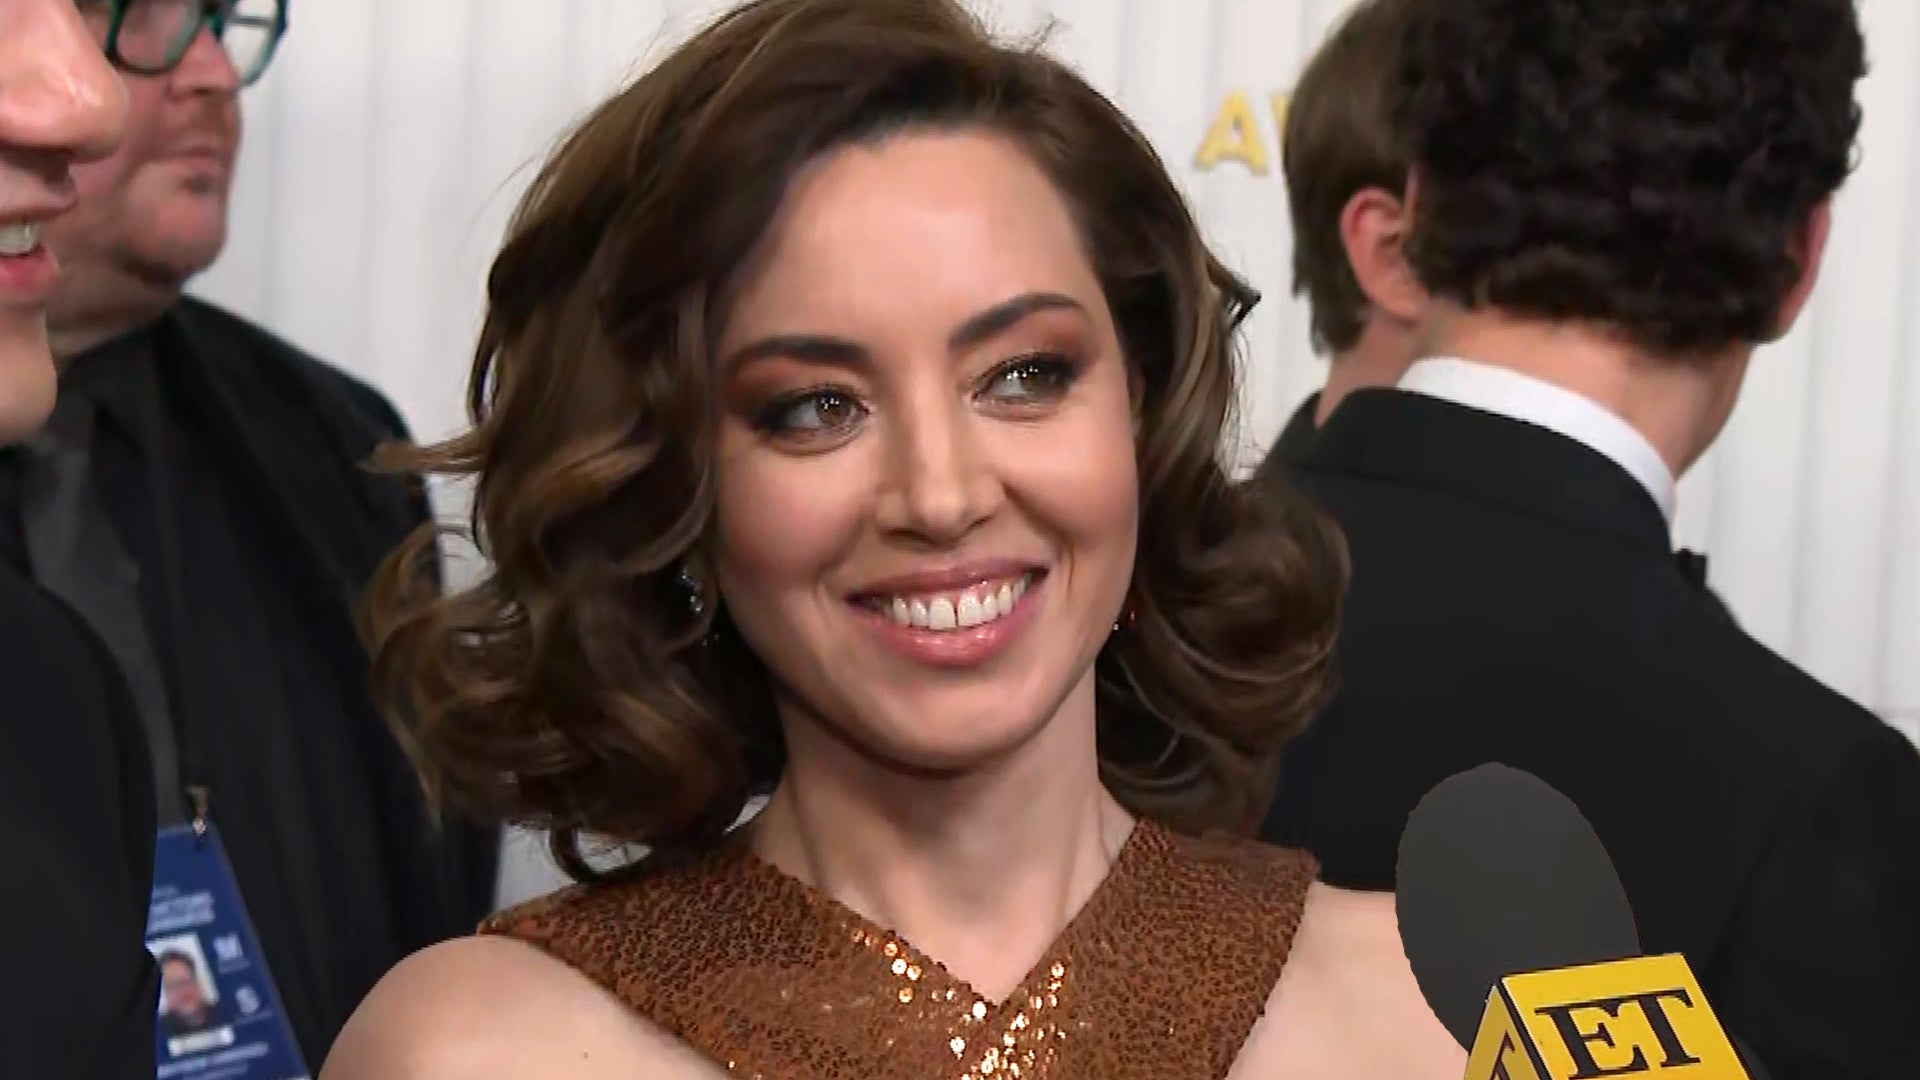 25 Aubrey Plaza Fashion Moments That Prove She's Always Been a